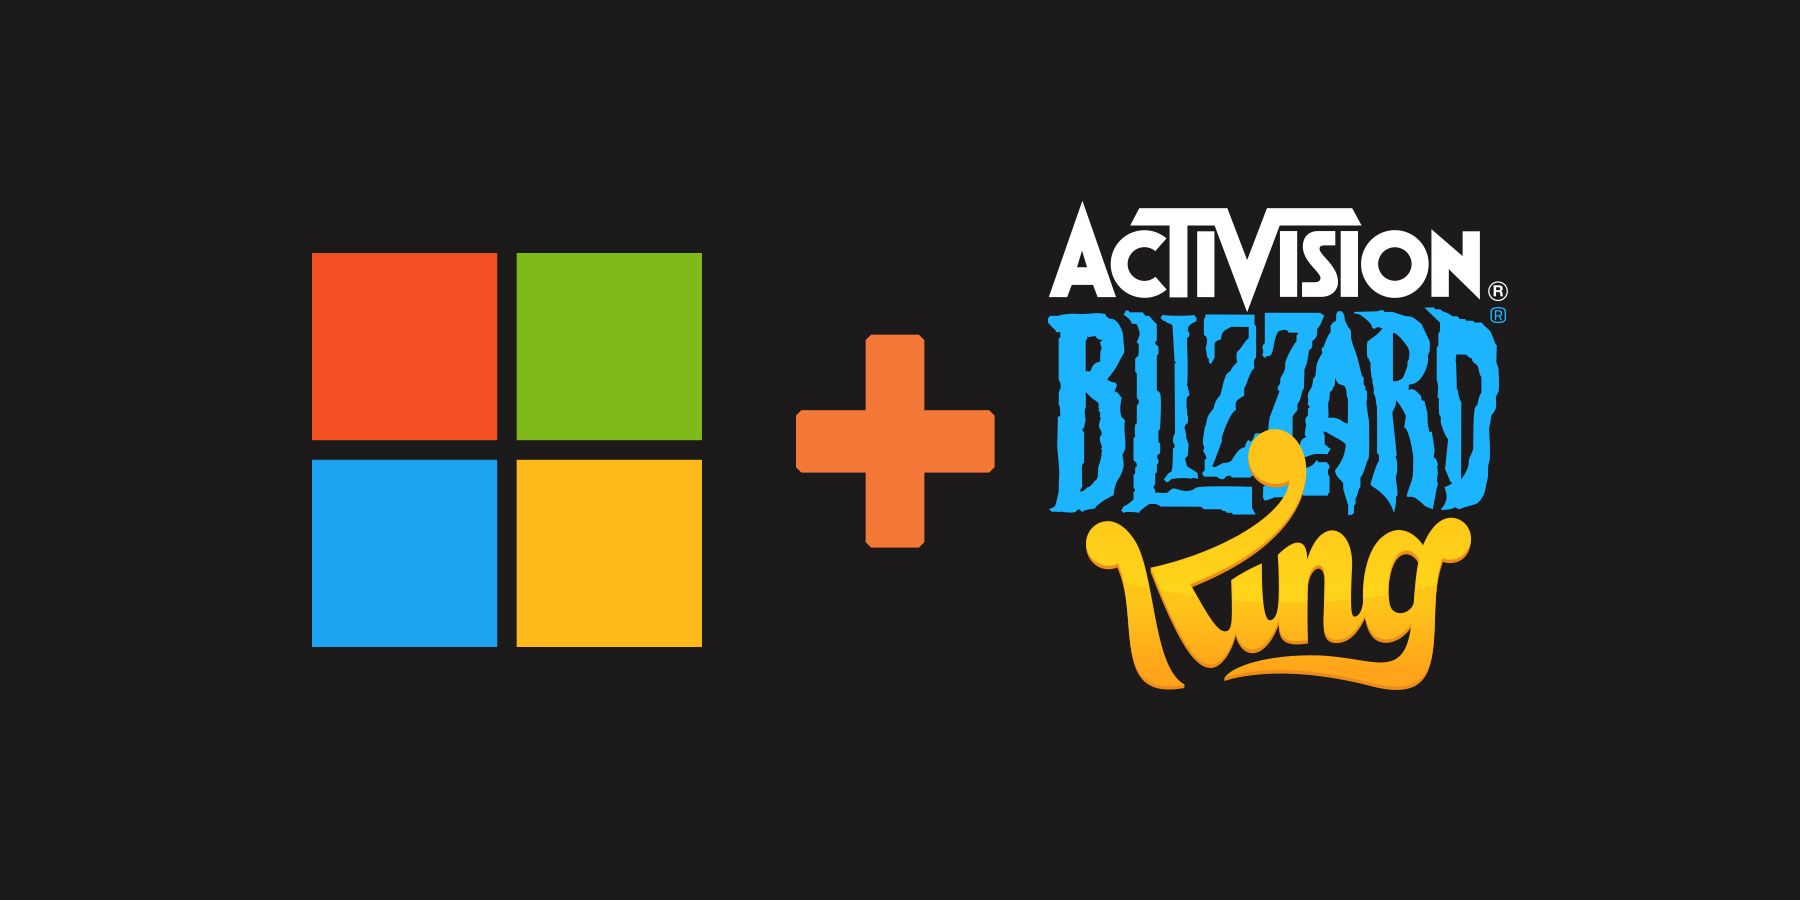 Microsoft closes deal to buy Call of Duty maker Activision Blizzard after  antitrust fights – Boston Herald